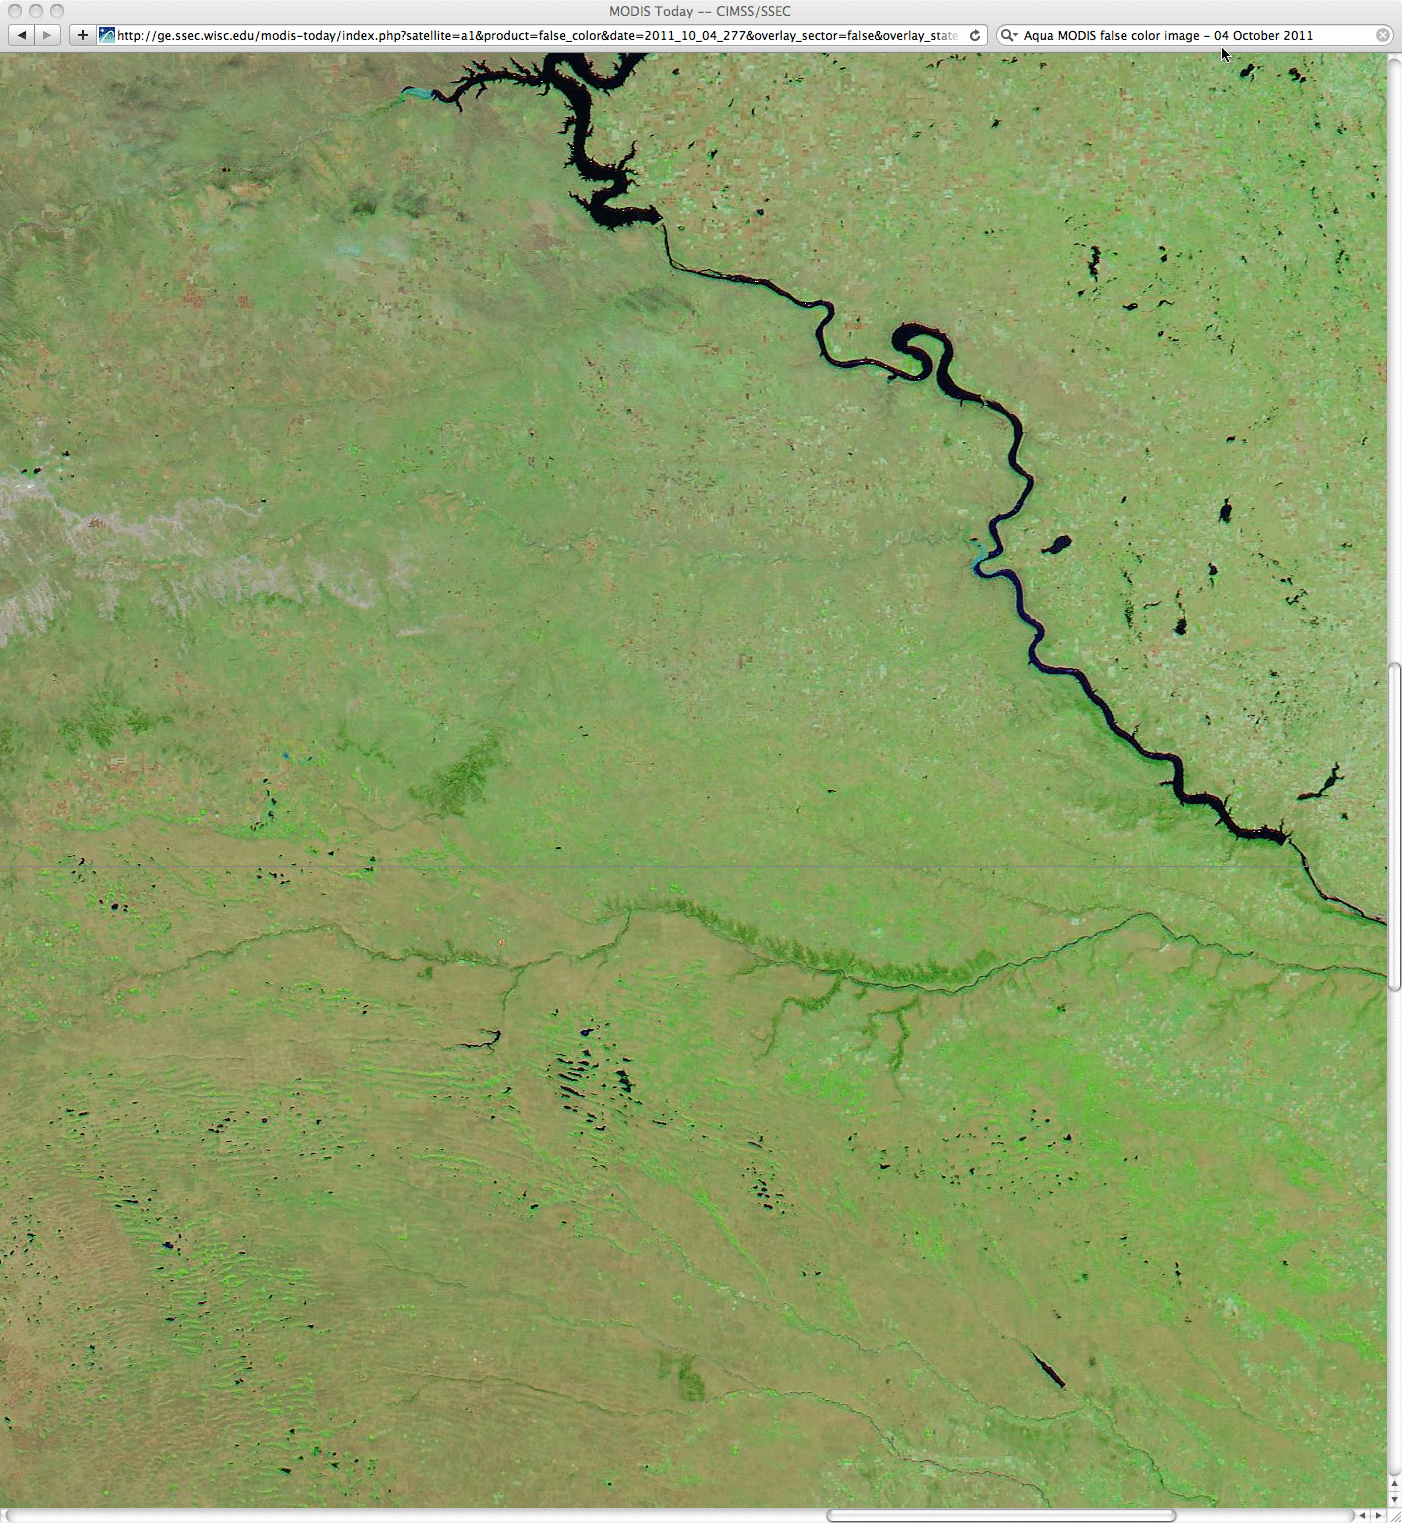 MODIS false-color RGB images from 04 October, 05 October, and 07 October 2011